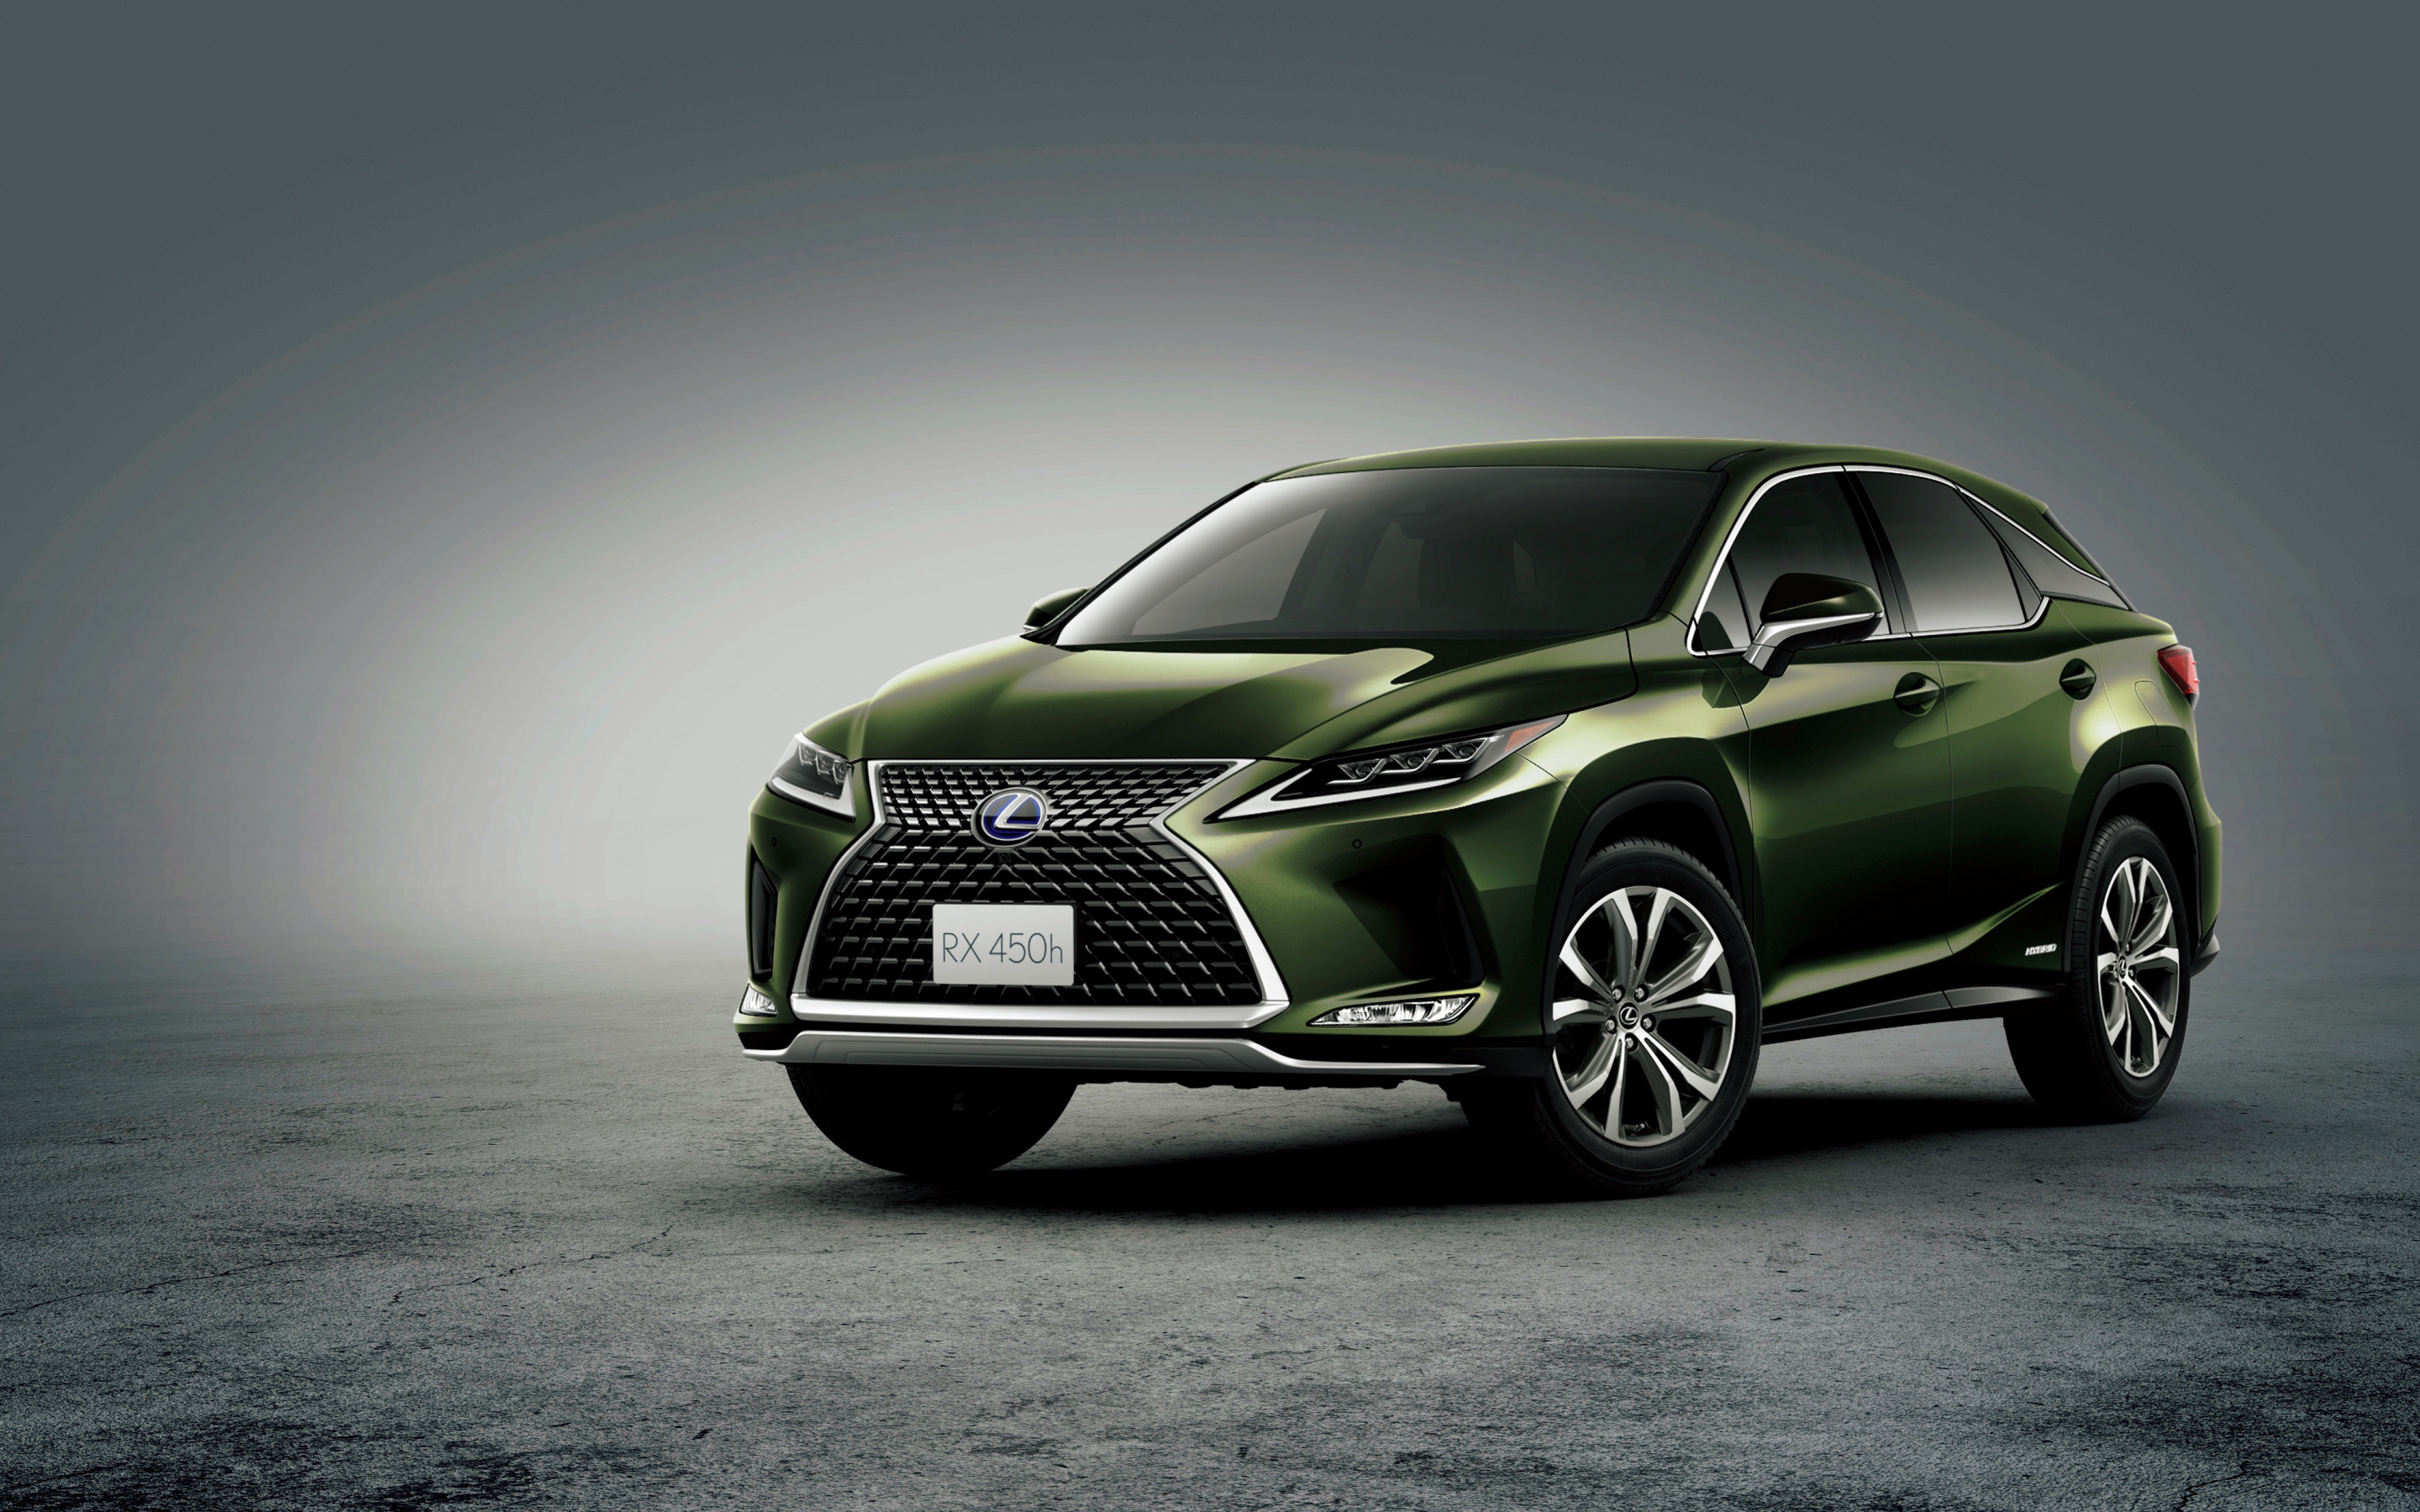 Lexus RX, Green crossover, Japanese excellence, High-quality HD pictures, 2880x1800 HD Desktop